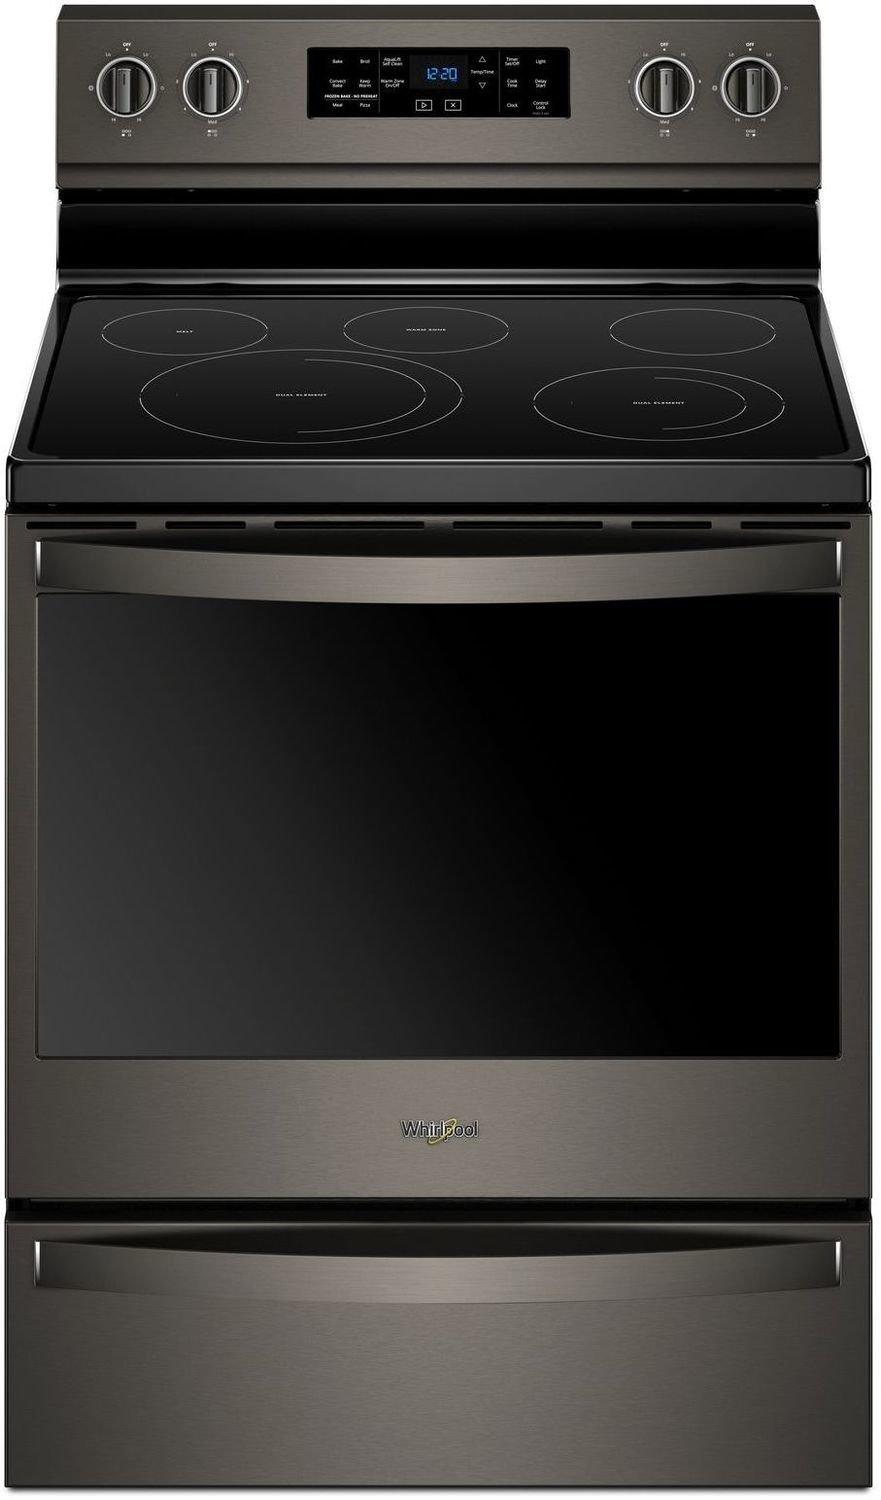 Whirlpool - 6.4 cu. ft  Electric Range in Black Stainless - YWFE775H0HV